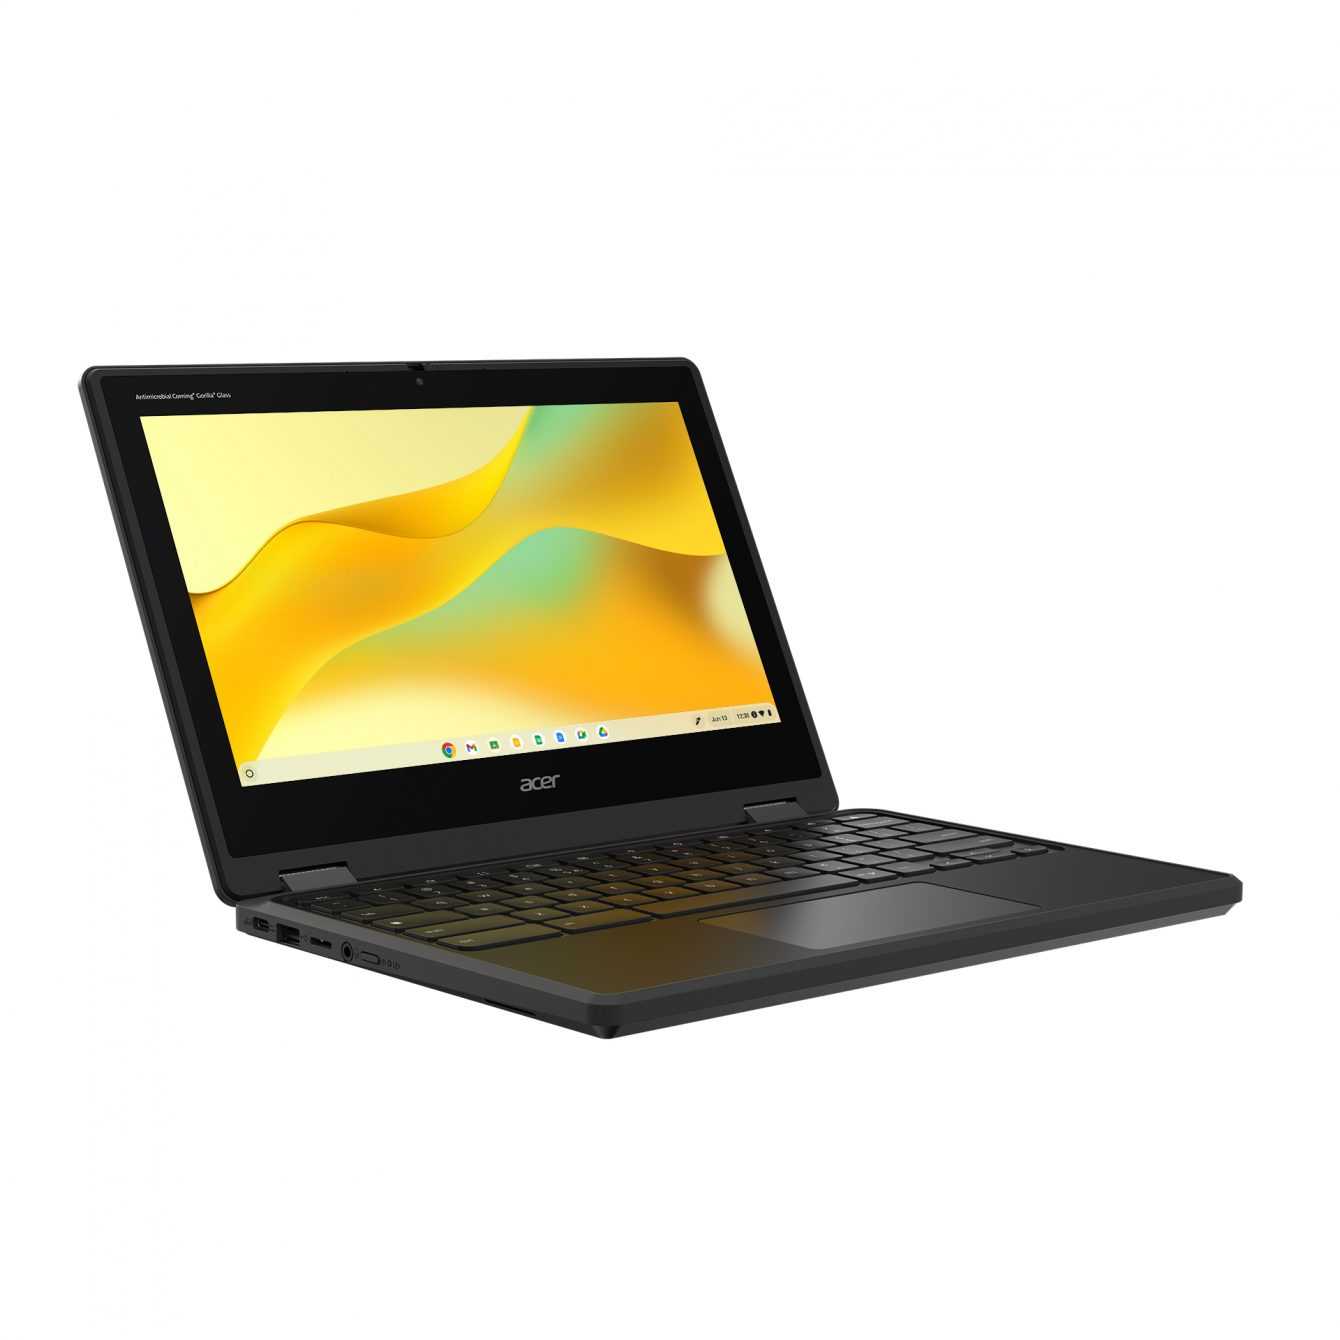 Acer TravelMate: these are the brand's new rugged notebooks